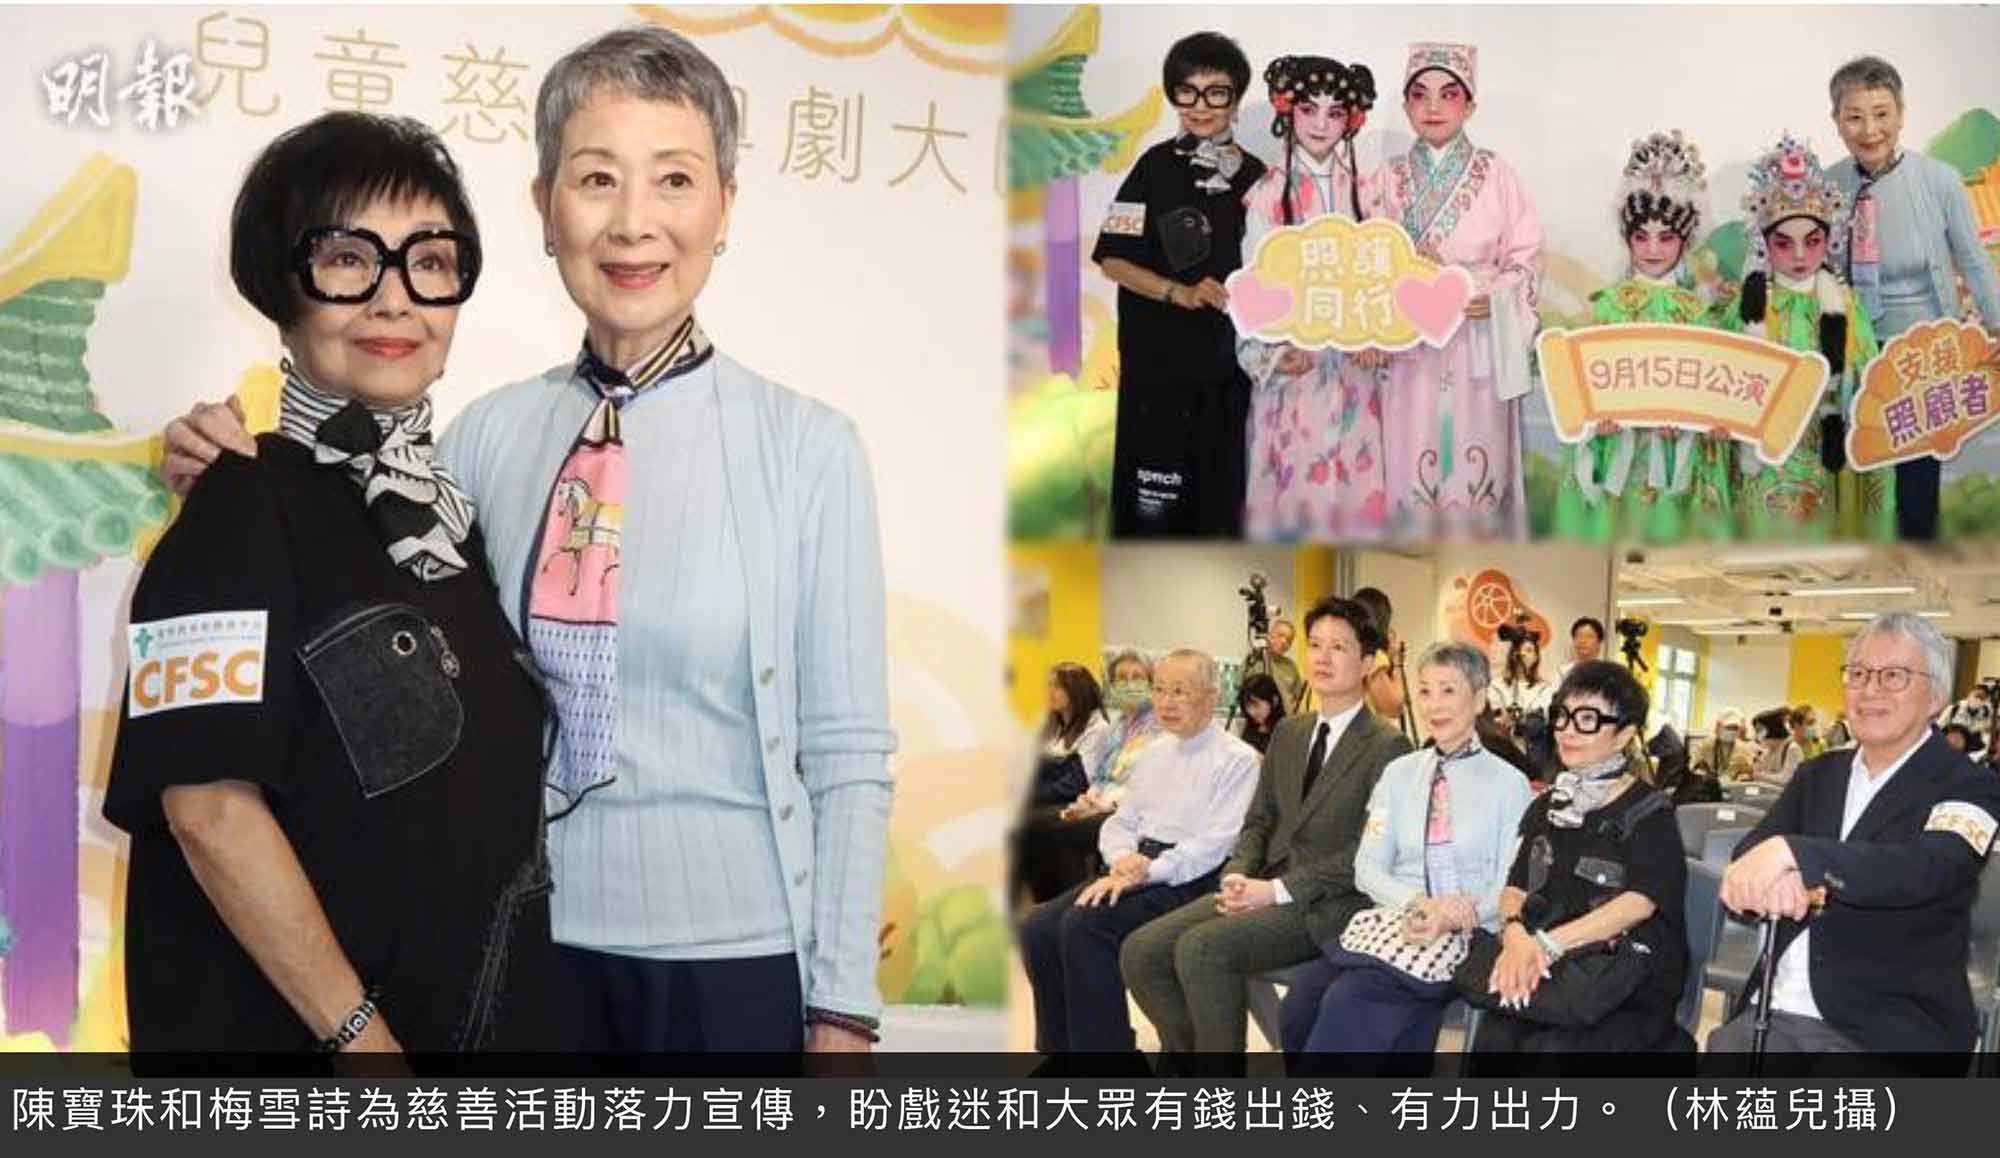 Cover Image - Mingpao OL - Charity Children Cantonese Opera for Carer Service  